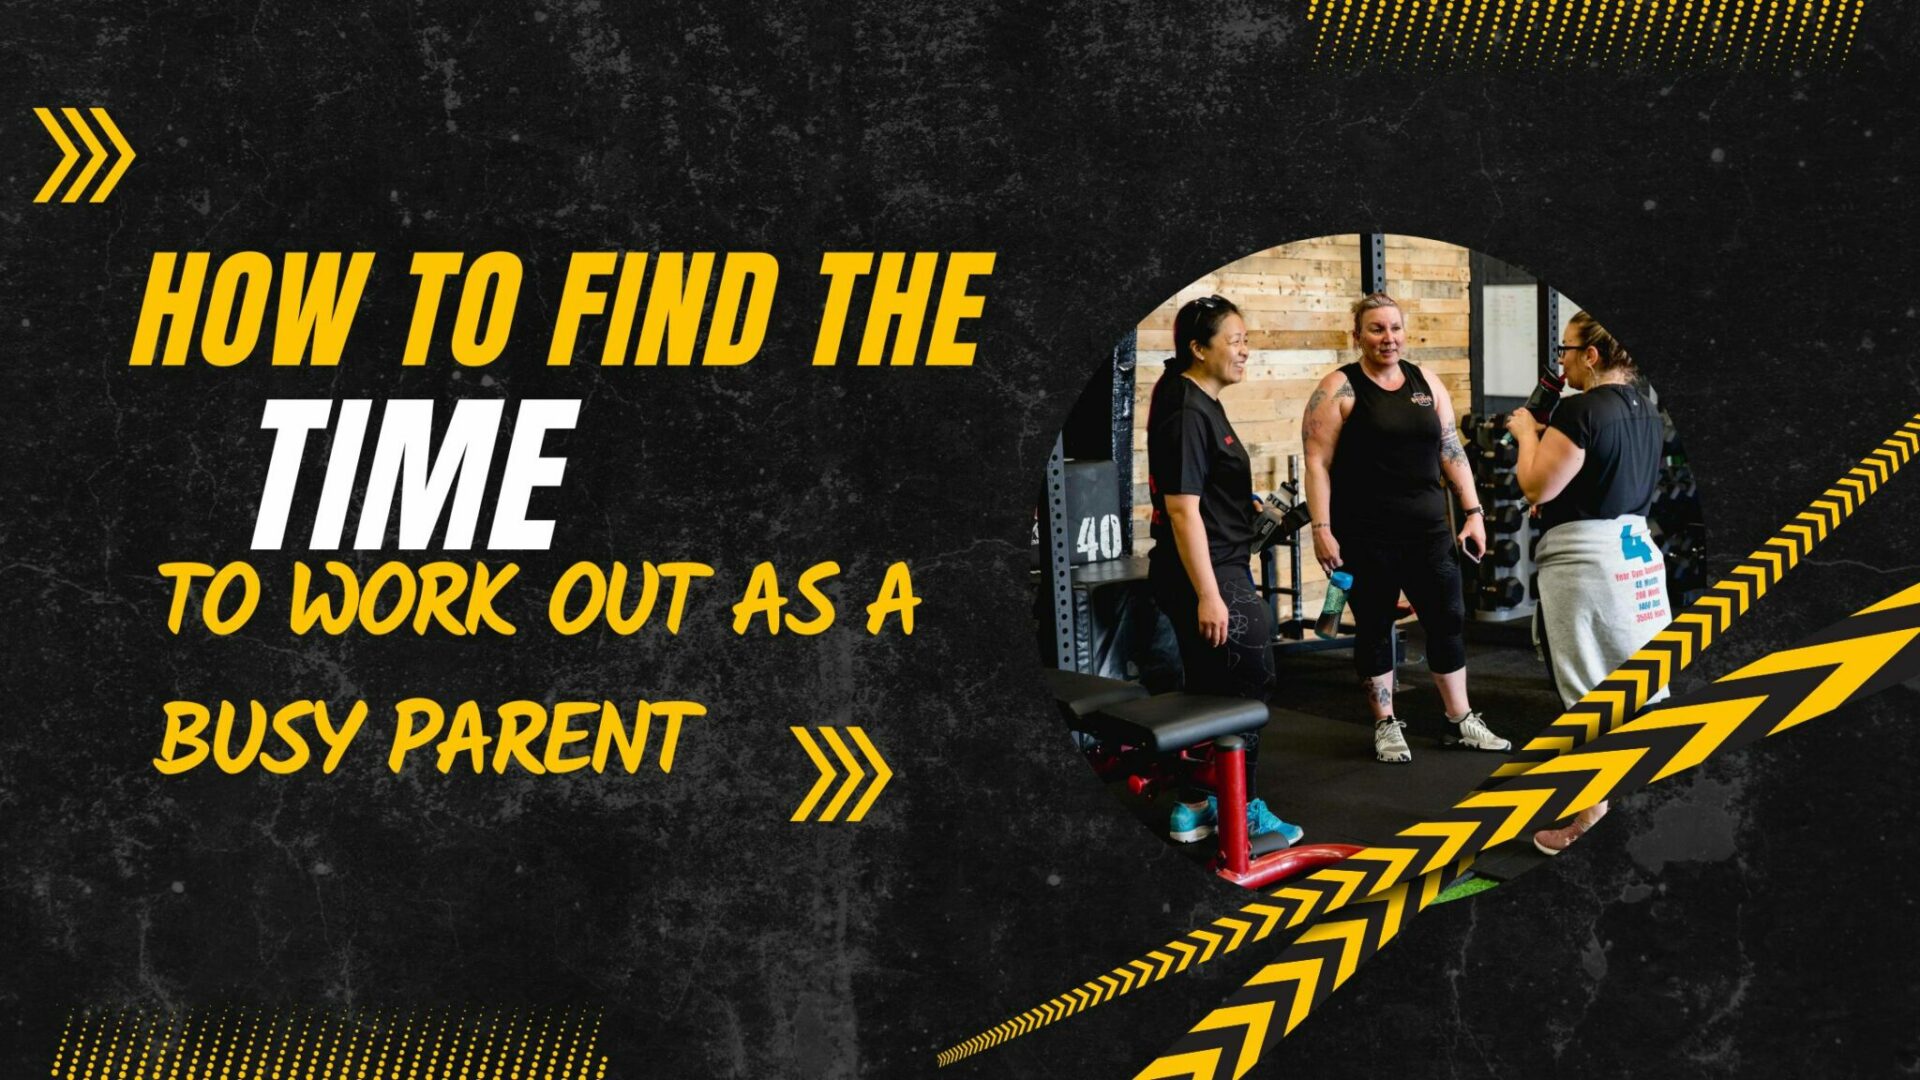 How to find the time to work out as a busy parent